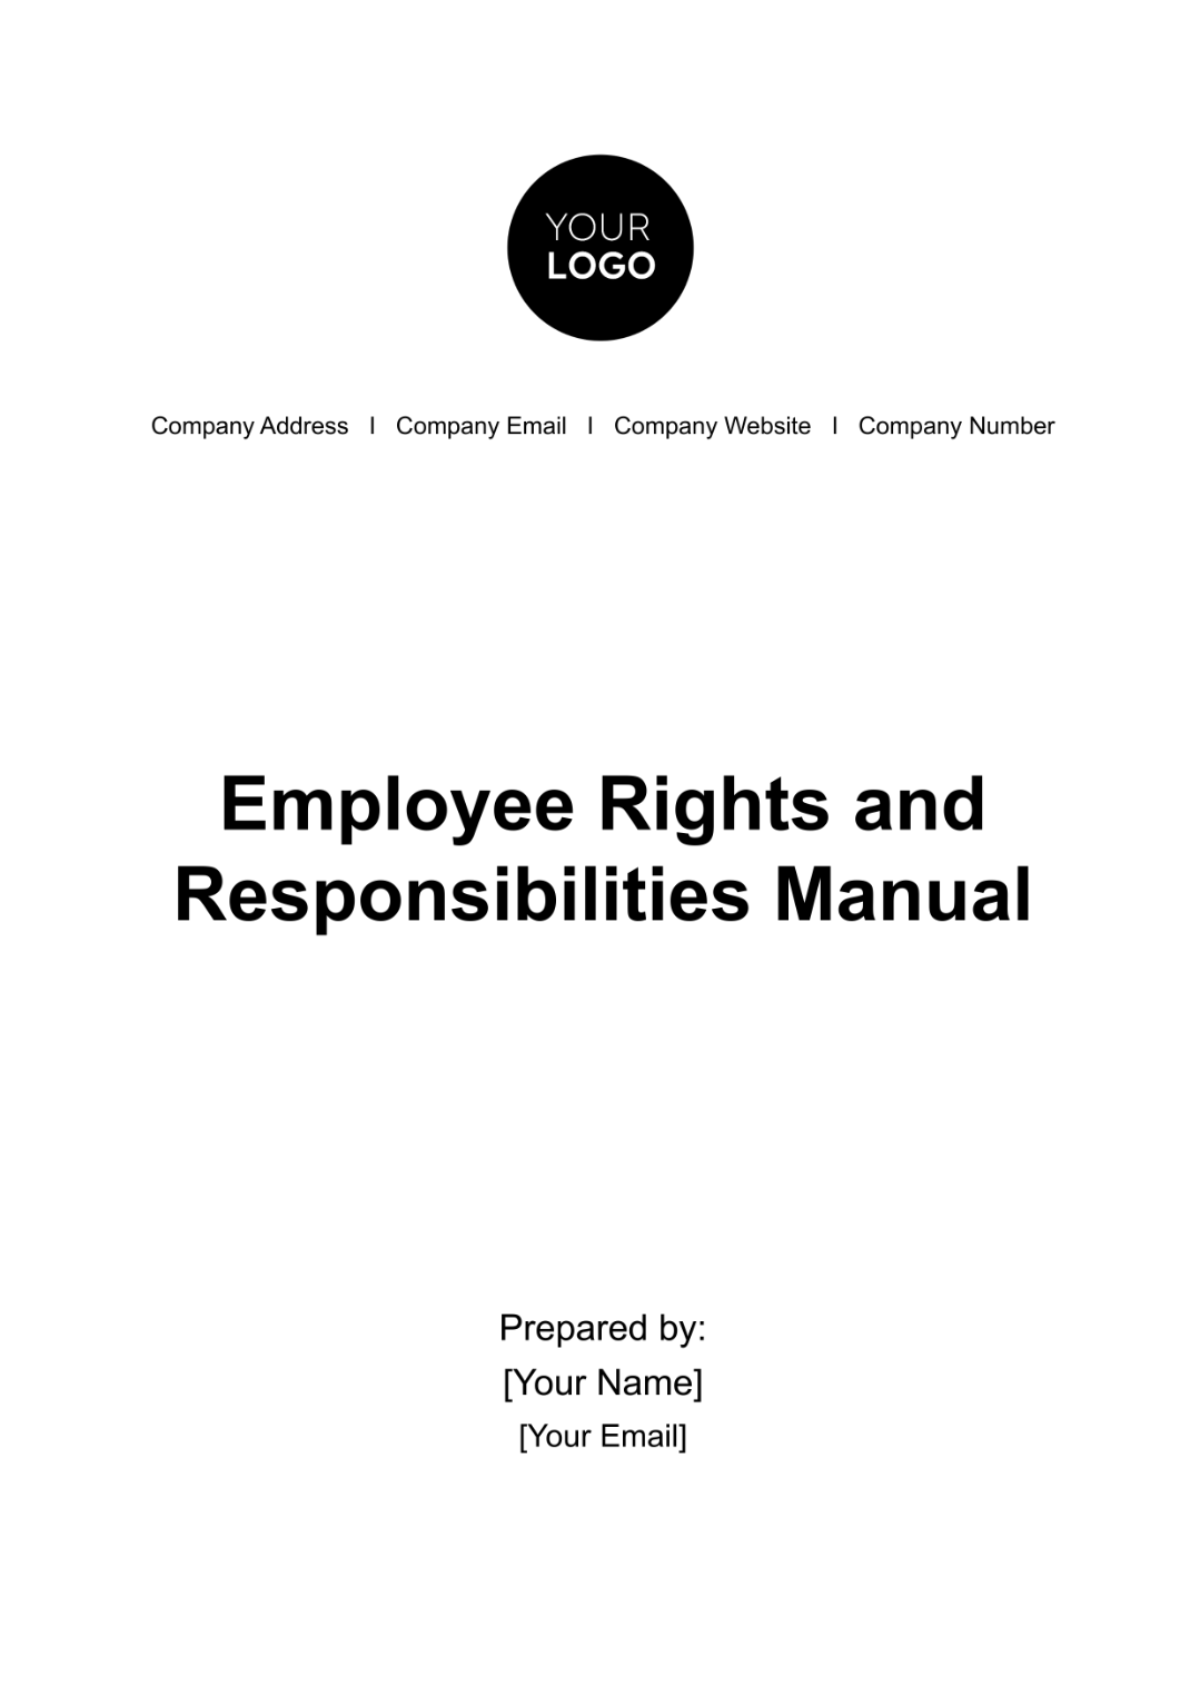 Free Employee Rights & Responsibilities Manual HR Template